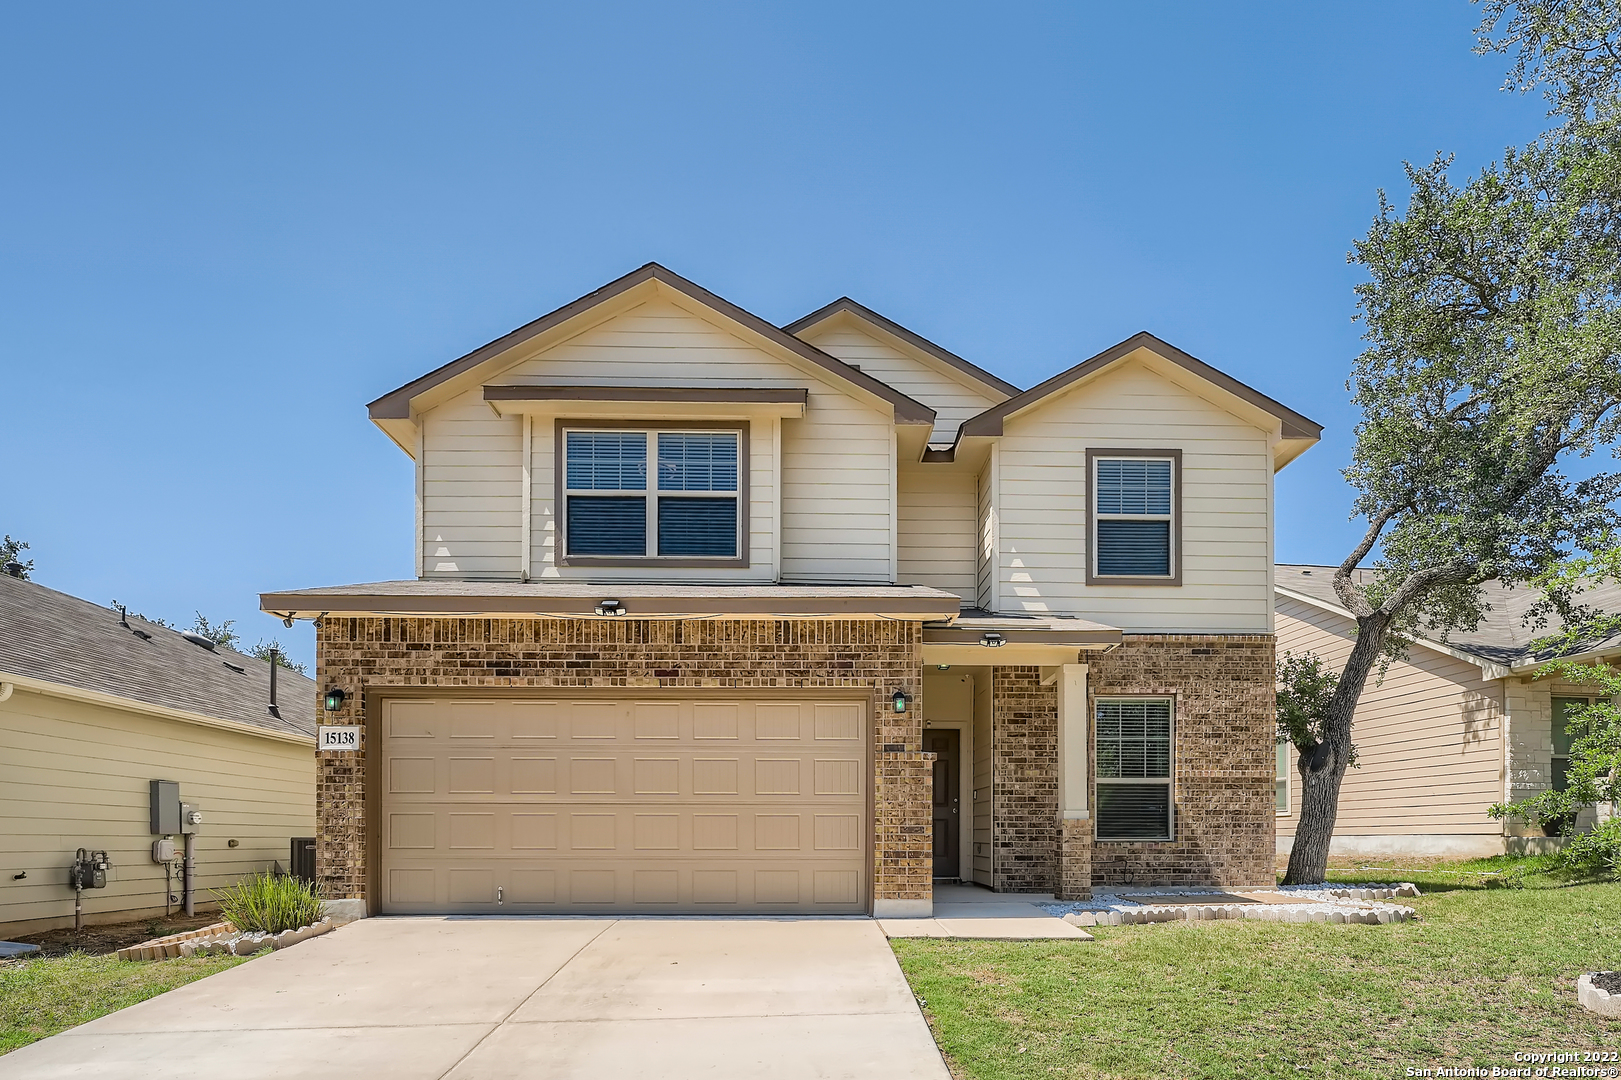 Turn-Key & Move-in Ready! 5 BR (Dual Master Up & D/STRS), 4 Full Bath in sought after Texas Research Park Community! This lovely home offers 2,814 sq ft ~ a versatile floor w/options for multi-generational living. Features also include - Water S & filtration sys, Granite cntp, Gas cooking, SS appliances, tumbled stone backsplash, Luxury vinyl plank FLG (main living & wet areas), Spa-like shower & Bay Window at Master, Built-in desk (kitchen), Spacious loft w/Projection screen, Cov Patio & Gazebo. Conveniently located with close & easy access to HEB, Citi Corp, Toyota, Westover Medical Center, Lackland Air Force Base, Schools, Major Hwy's, Dining, and Recreation!